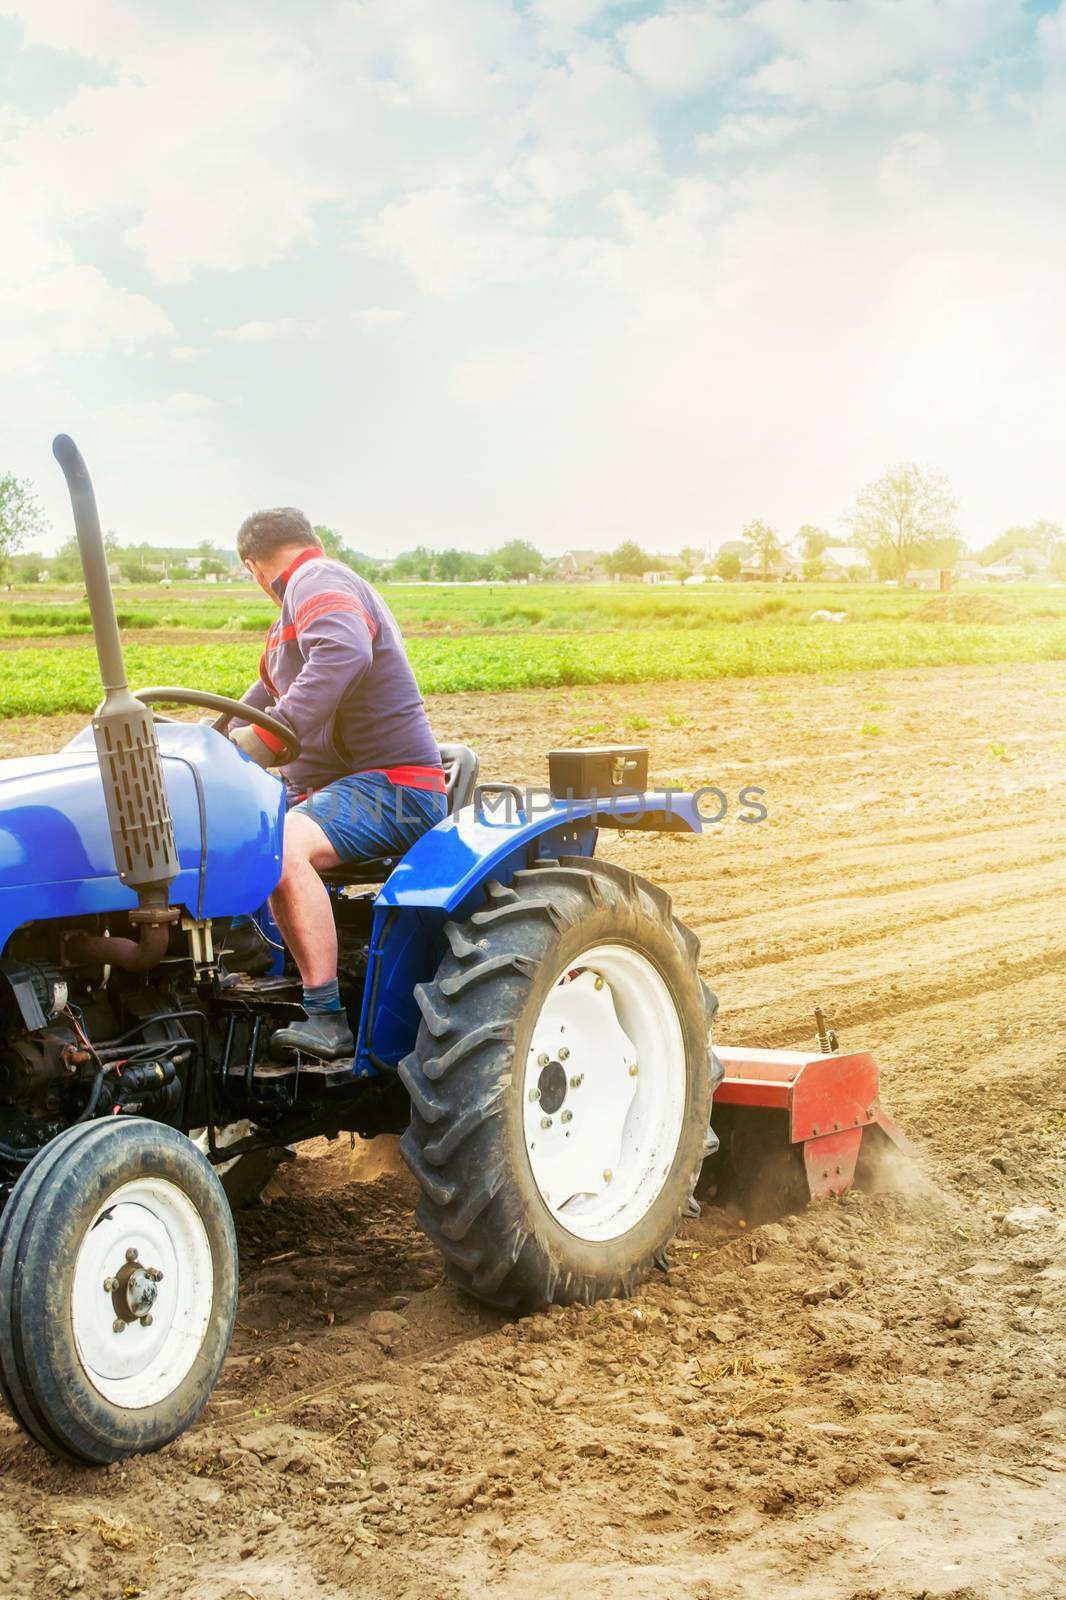 A farmer on a tractor cultivates a farm field. Soil milling, crumbling and mixing. Agriculture, growing organic food vegetables. Loosening the surface, cultivating the land for further planting. by iLixe48